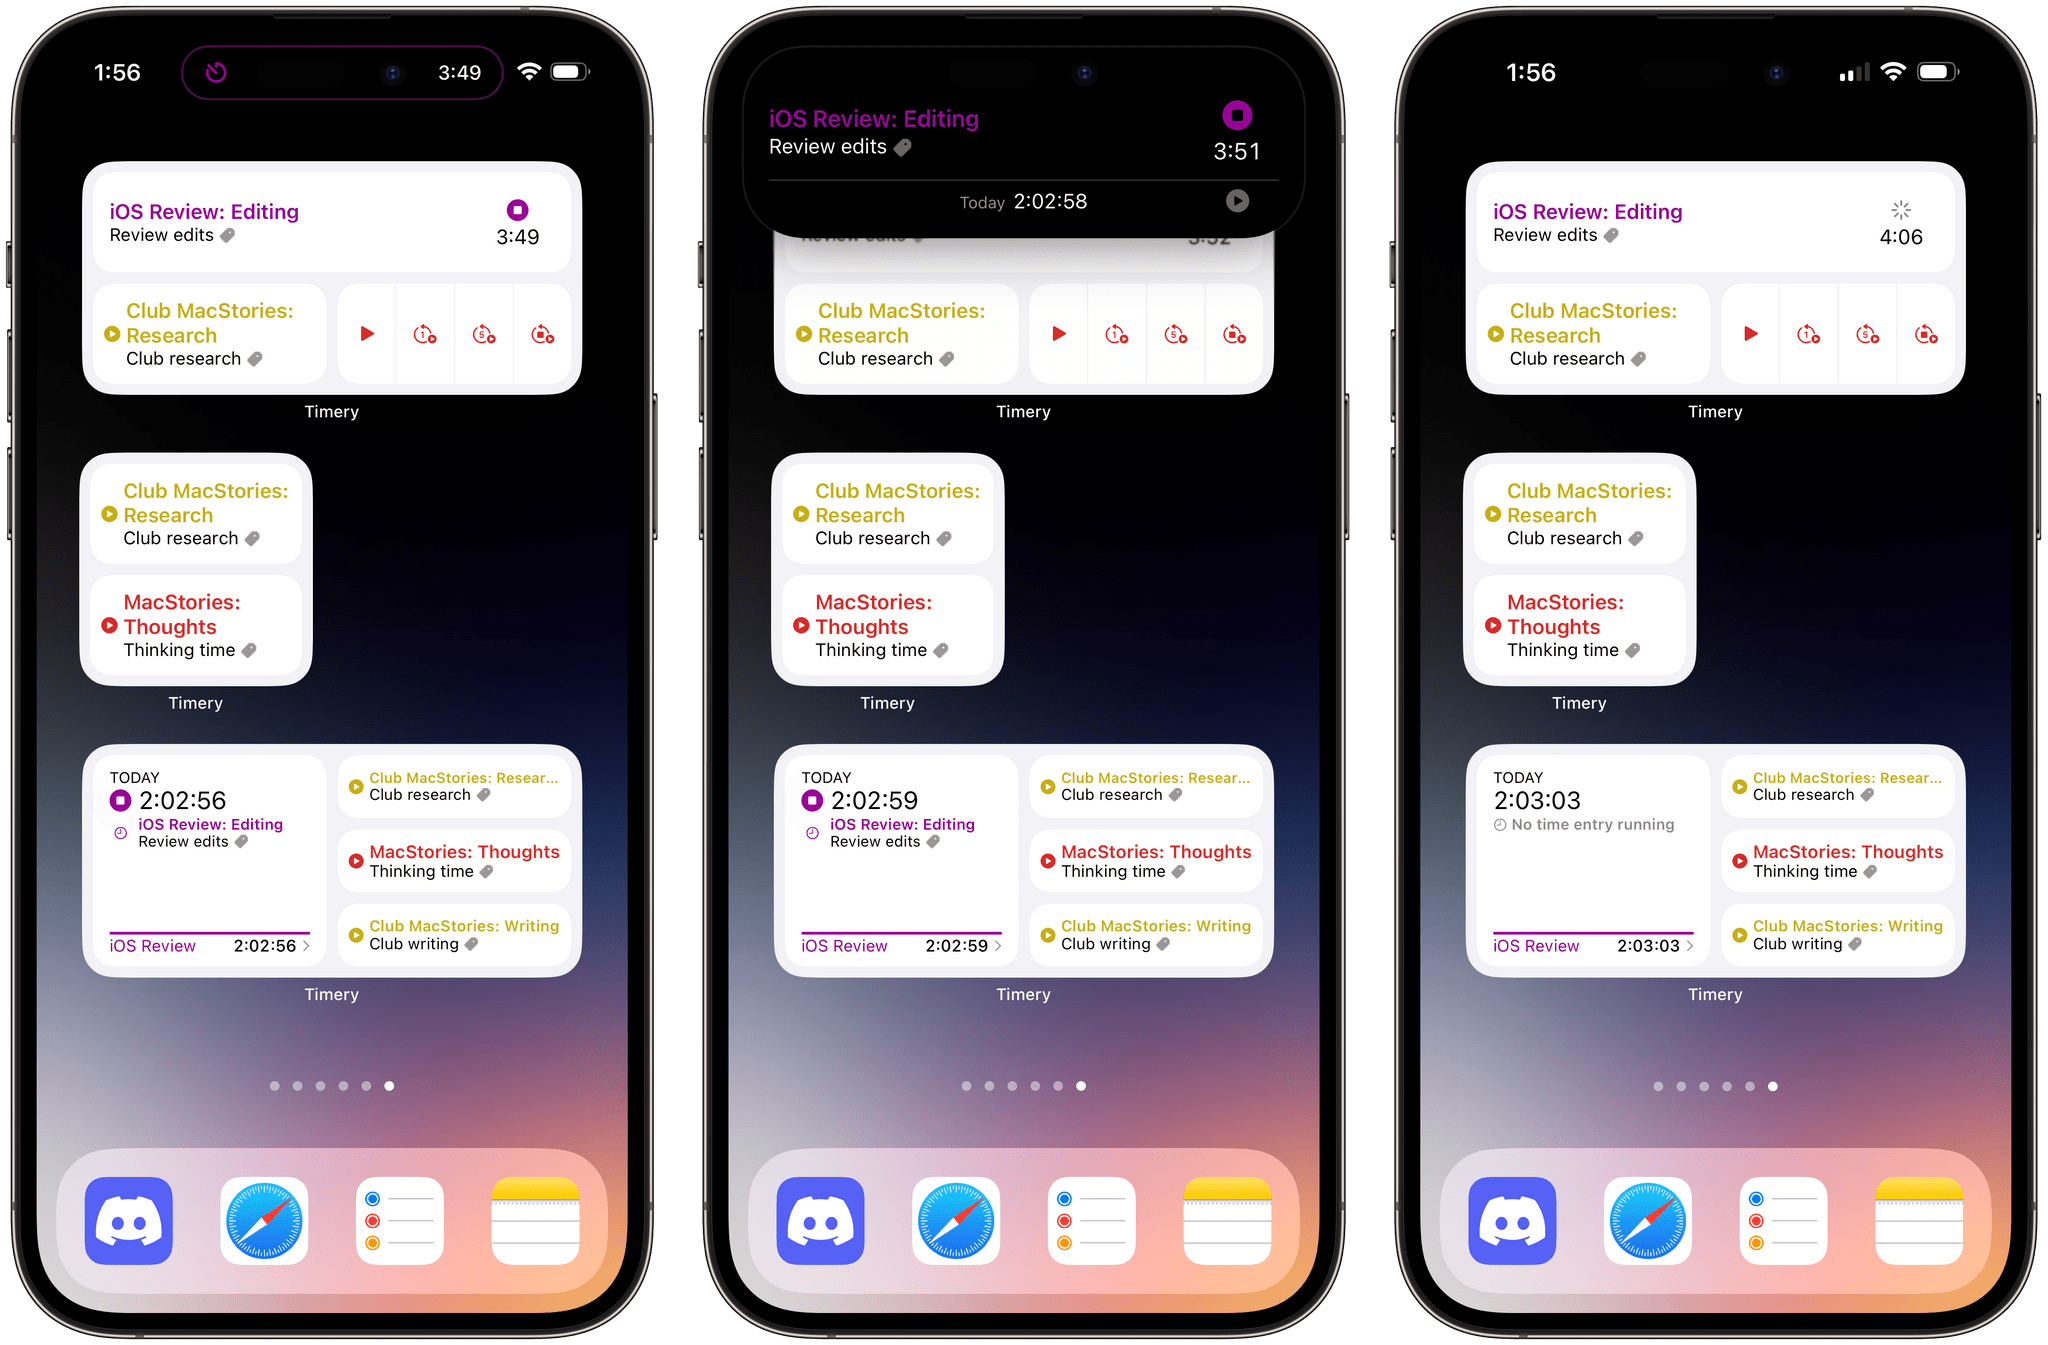 The new Timery widgets let you start a timer (left), which will automatically start a Live Activity too (center). The interactive stop button (right) allows you to stop a currently running timer.